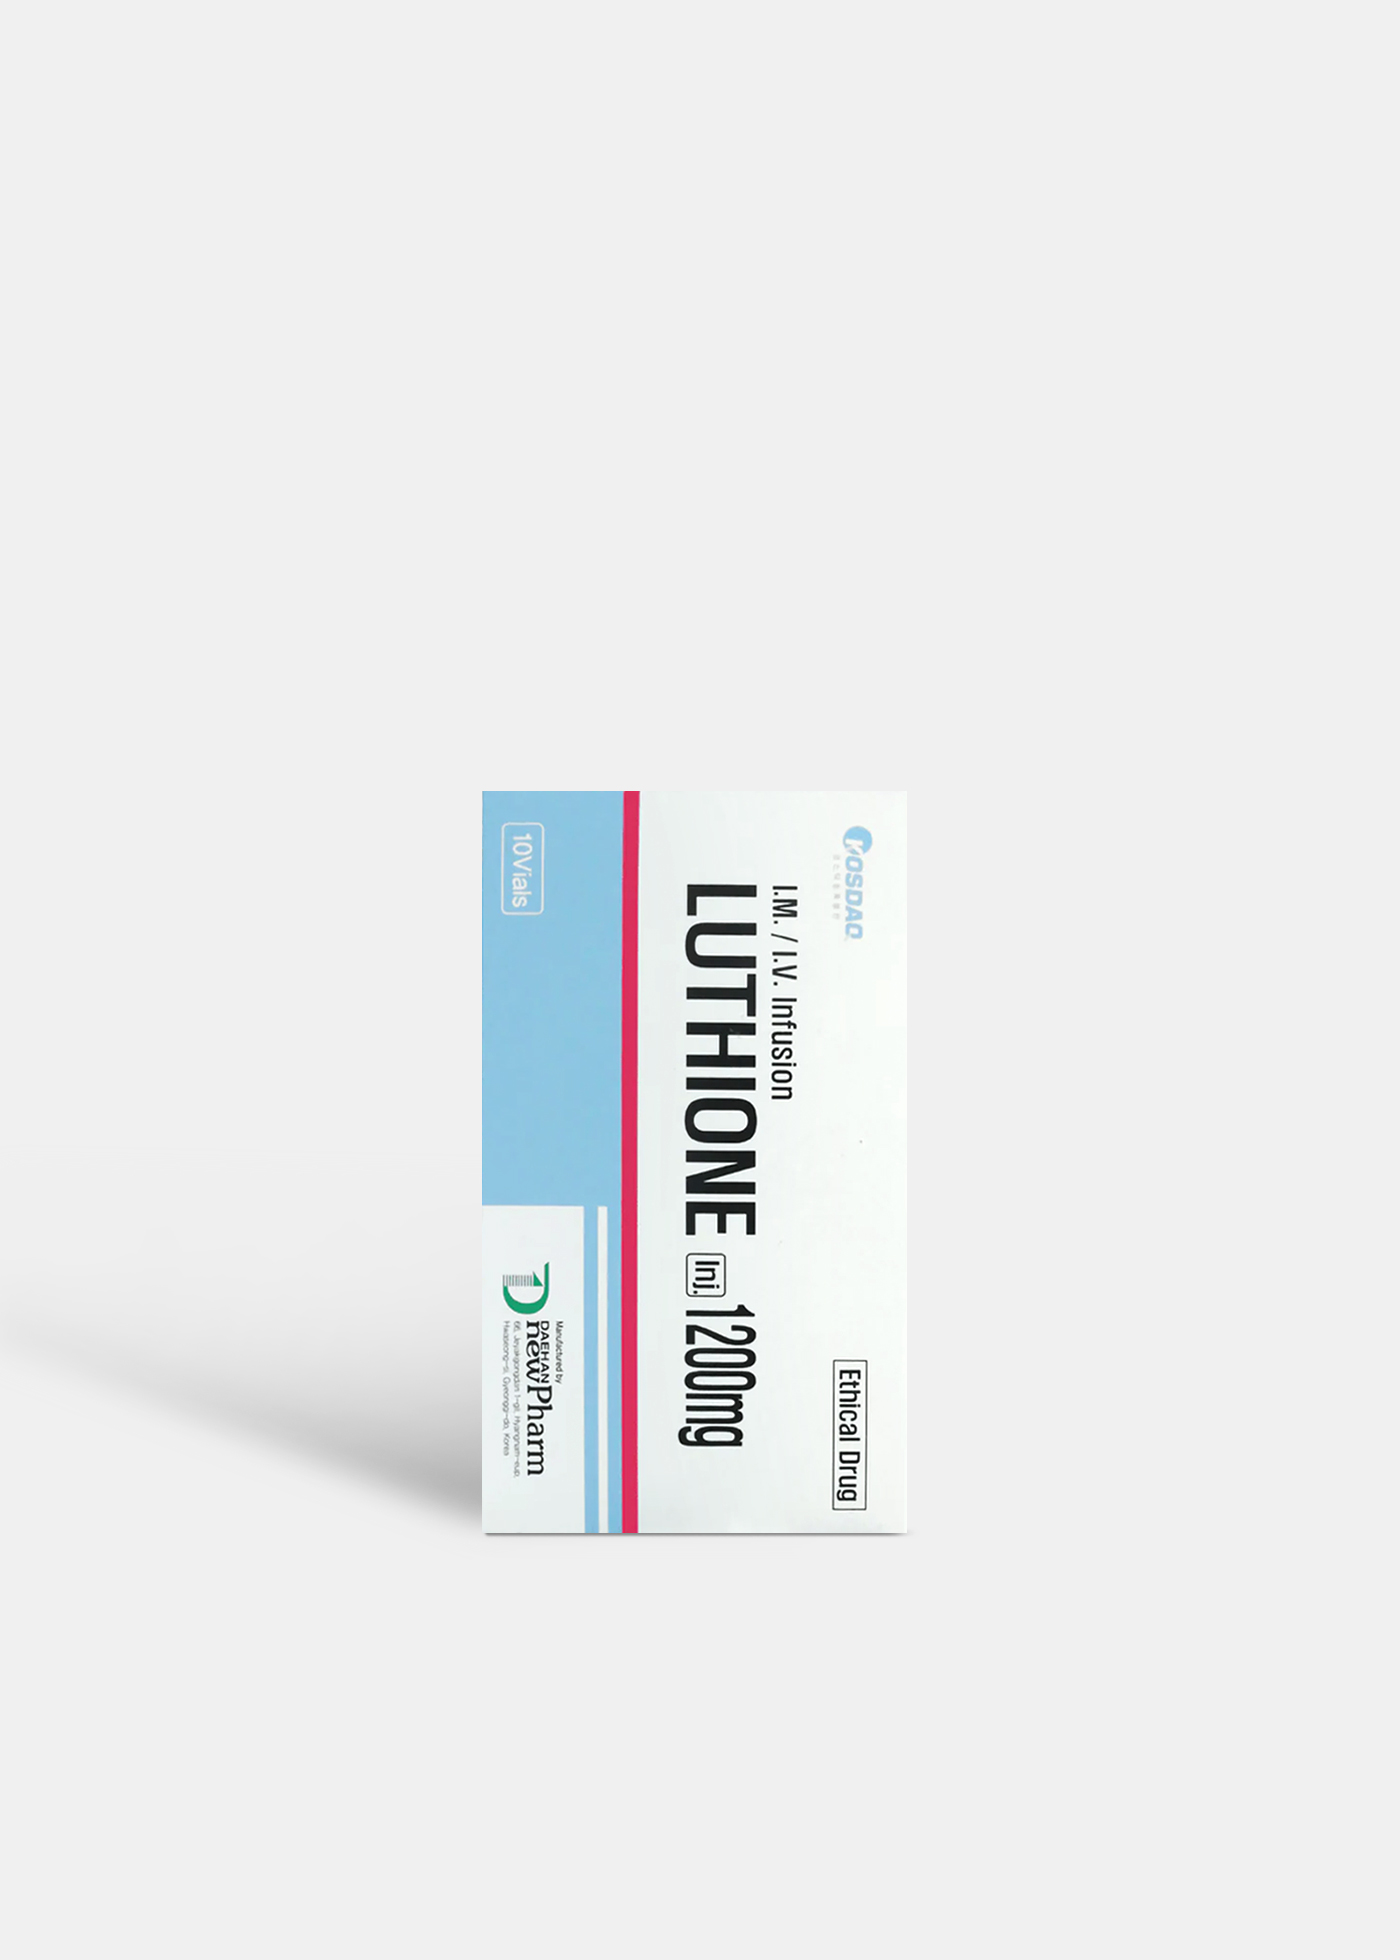 LUTHIONE 1200mg